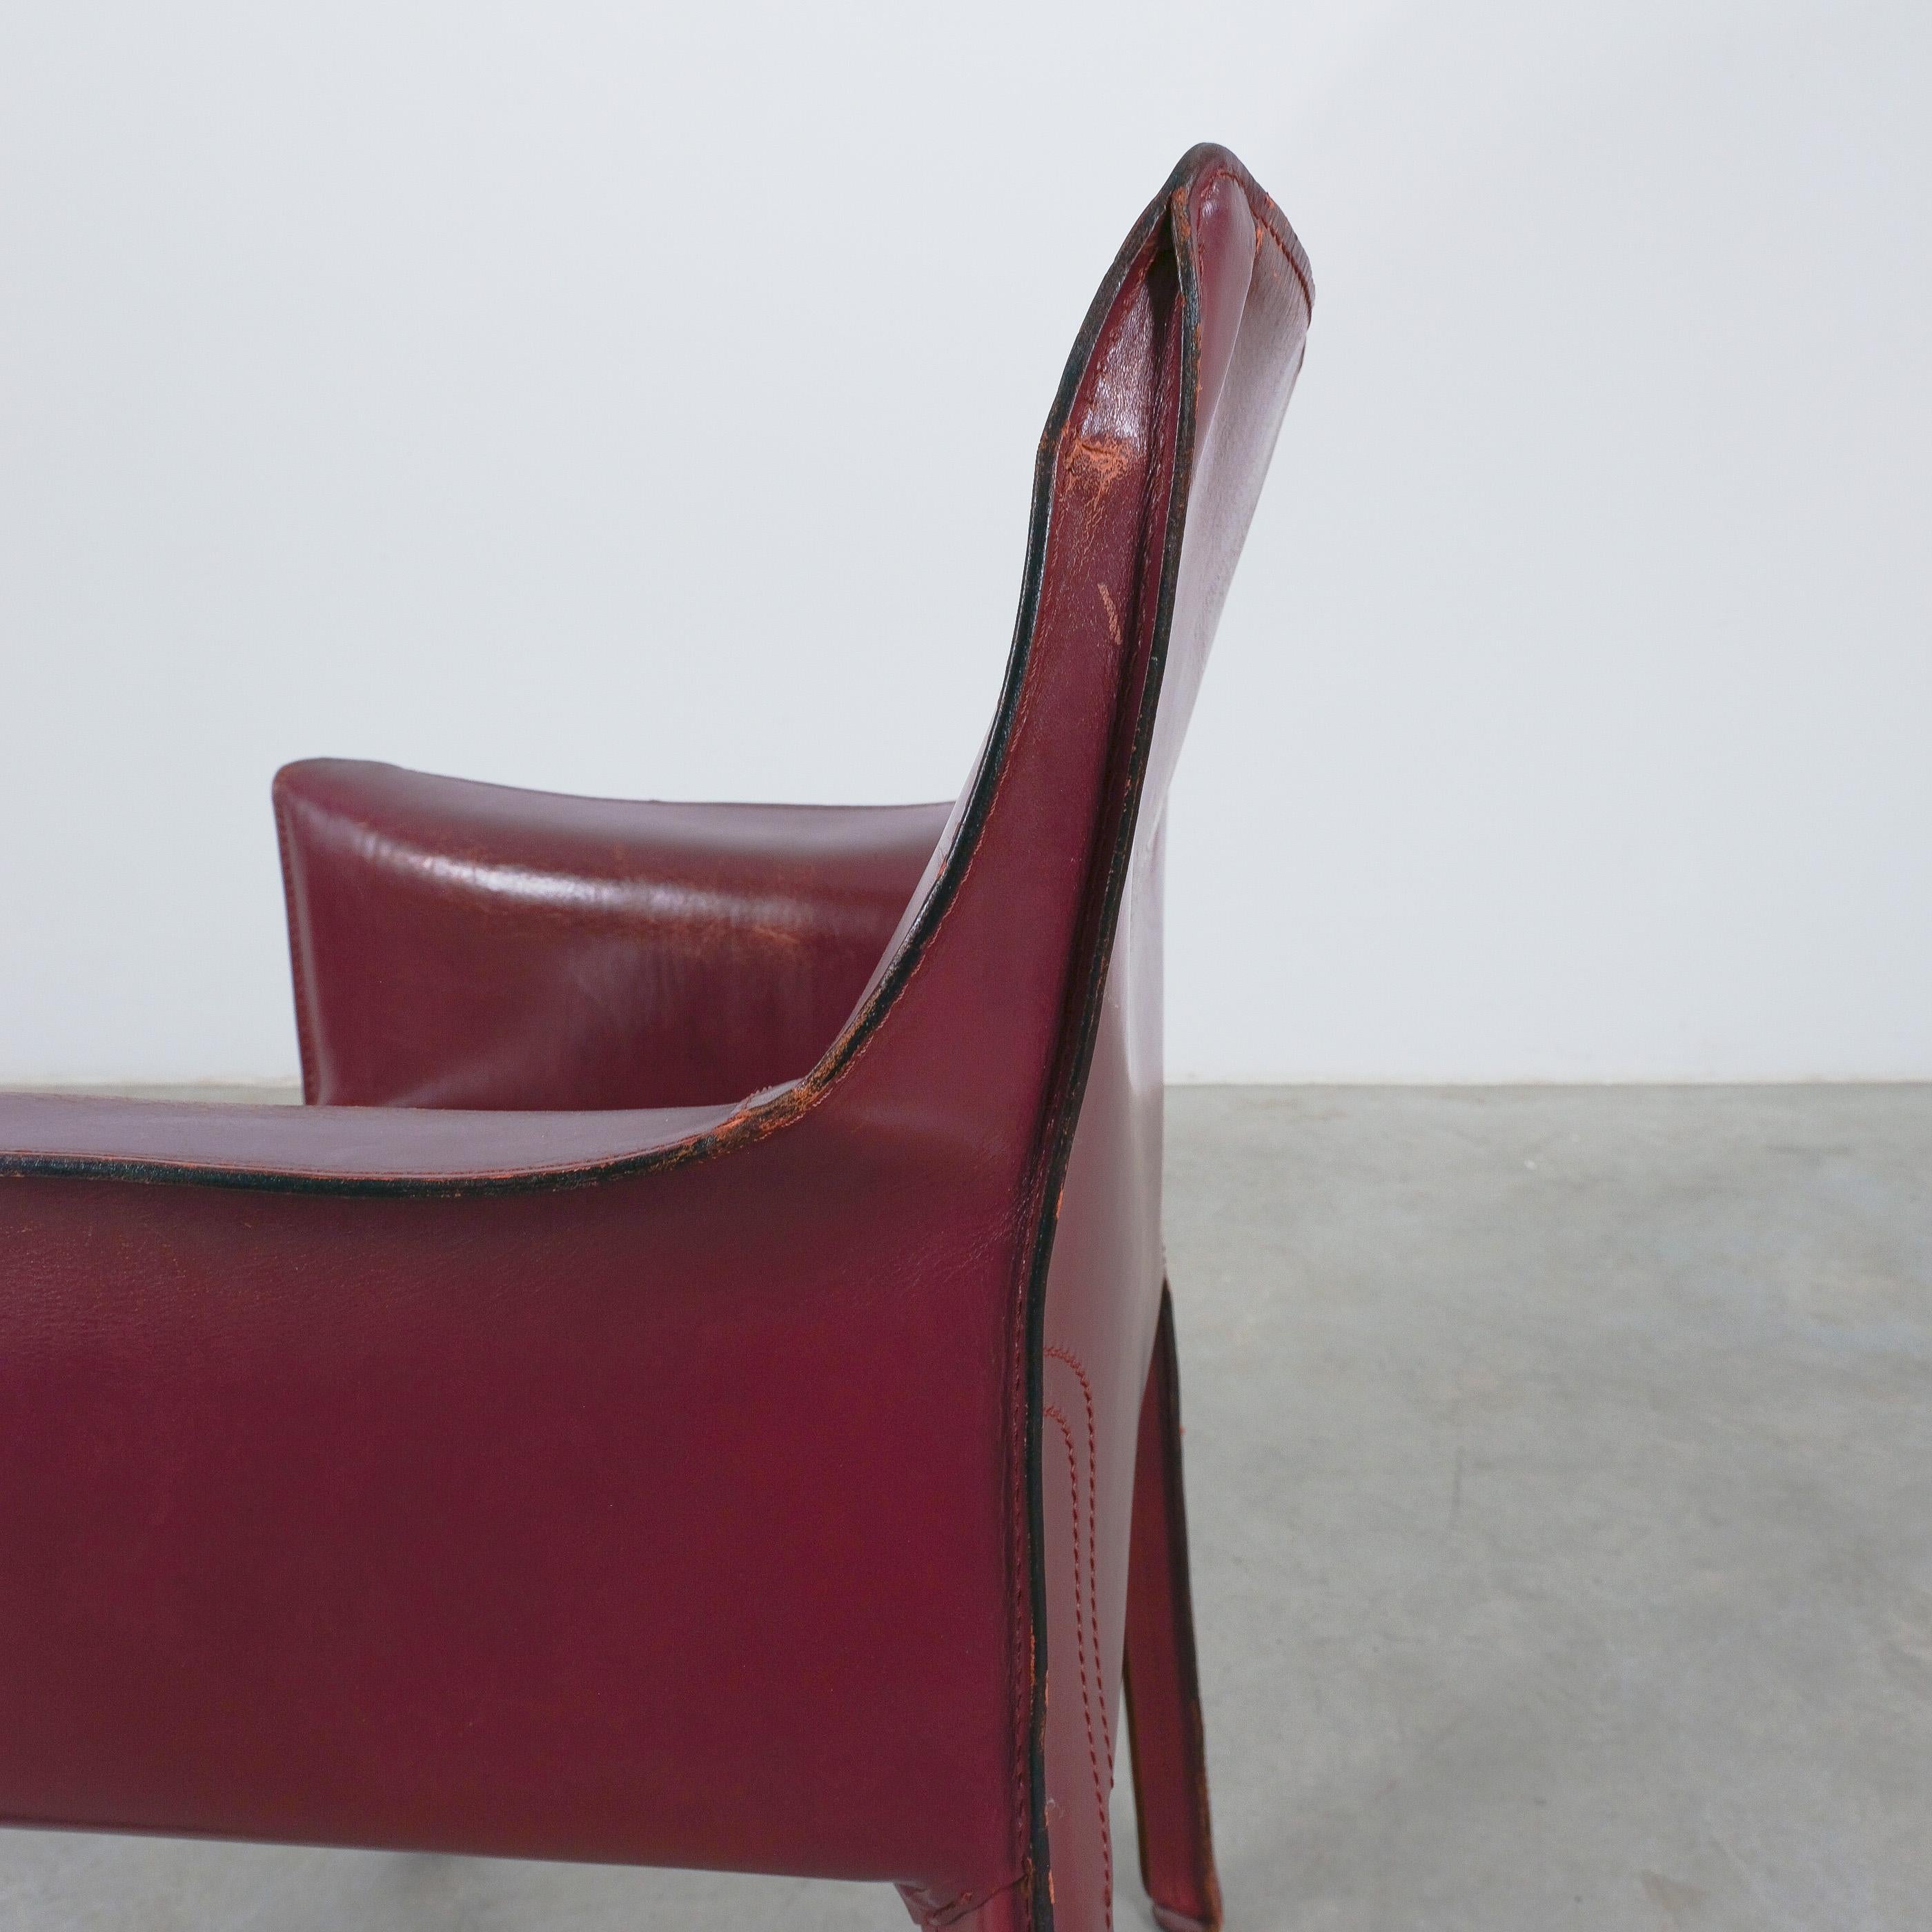 Mario Bellini Cassina Cab 413 Burgundy Red Leather Dining Chairs, 1980 For Sale 6